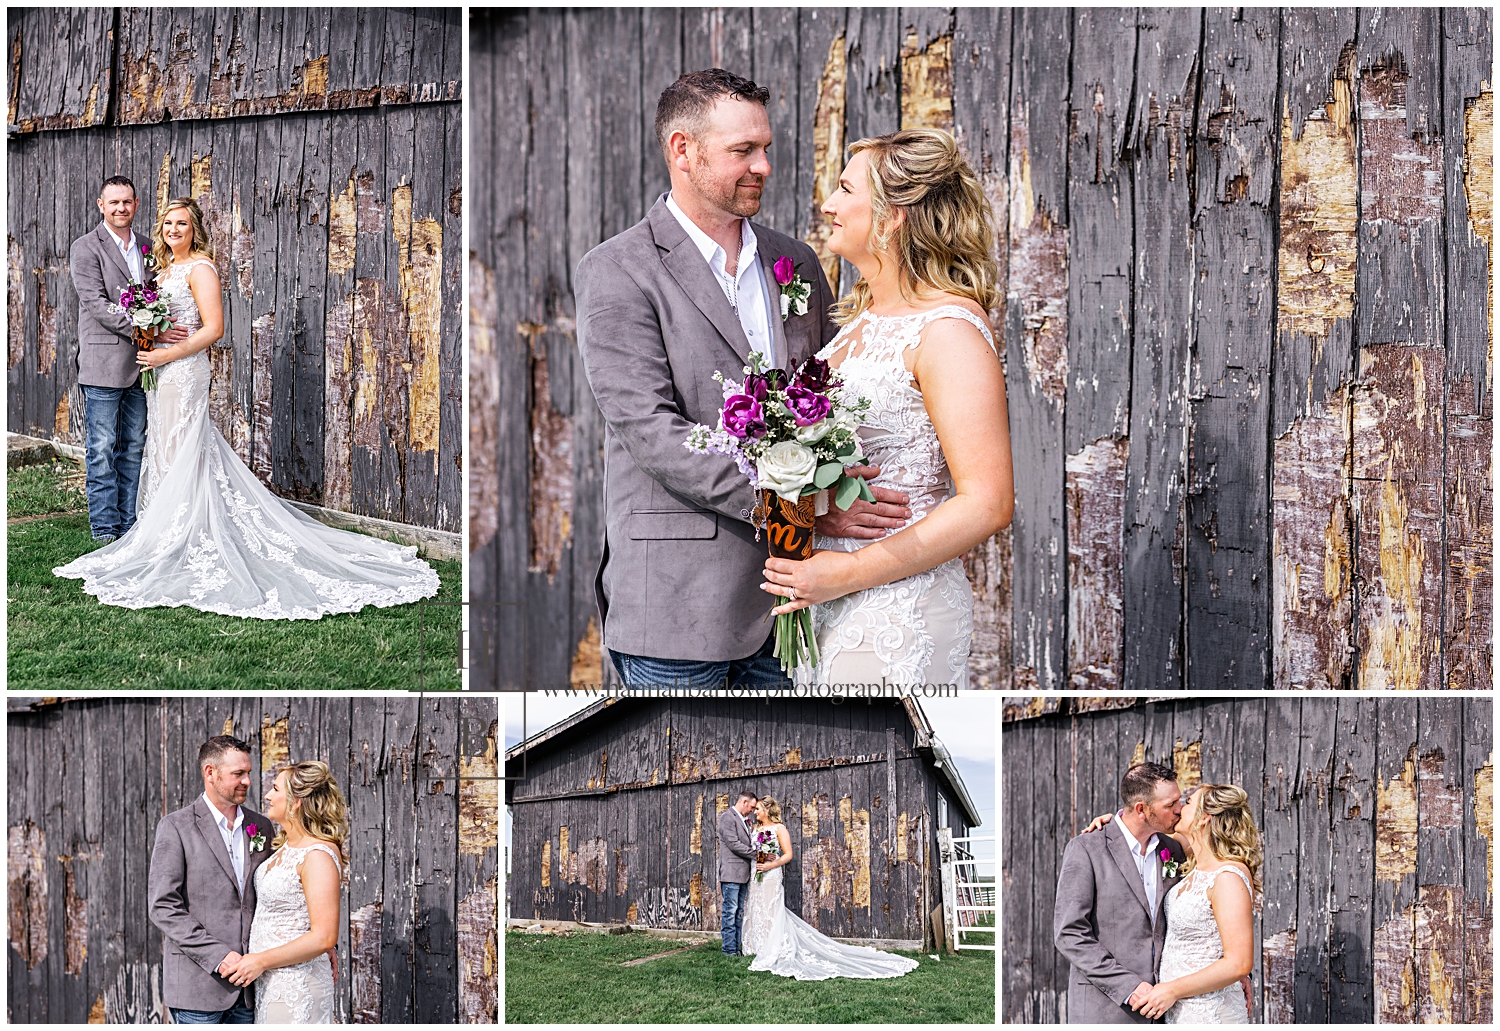 Bride and groom pose in front of rustic brown barn for wedding photos.